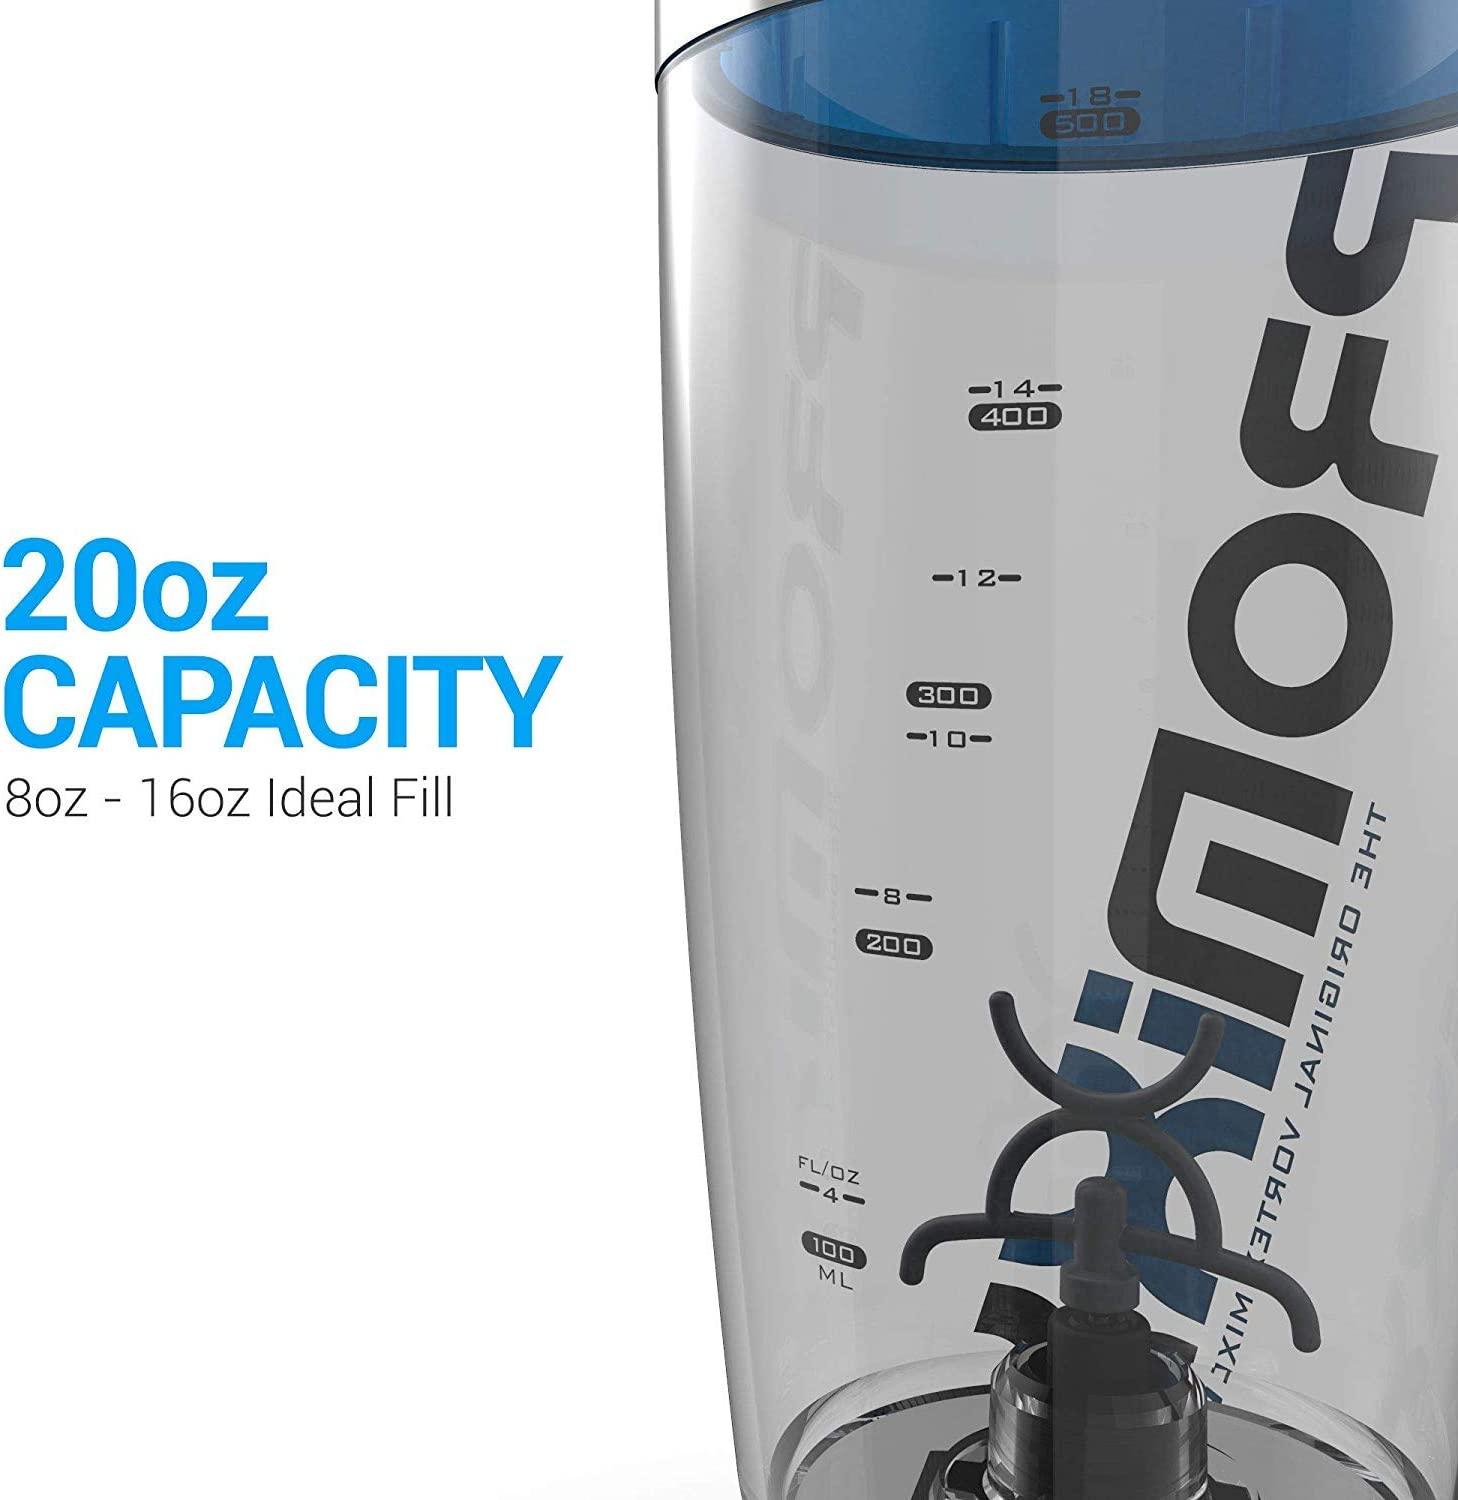 Promixx - Pro Shaker Bottle, Rechargeable, Powerful For Smooth